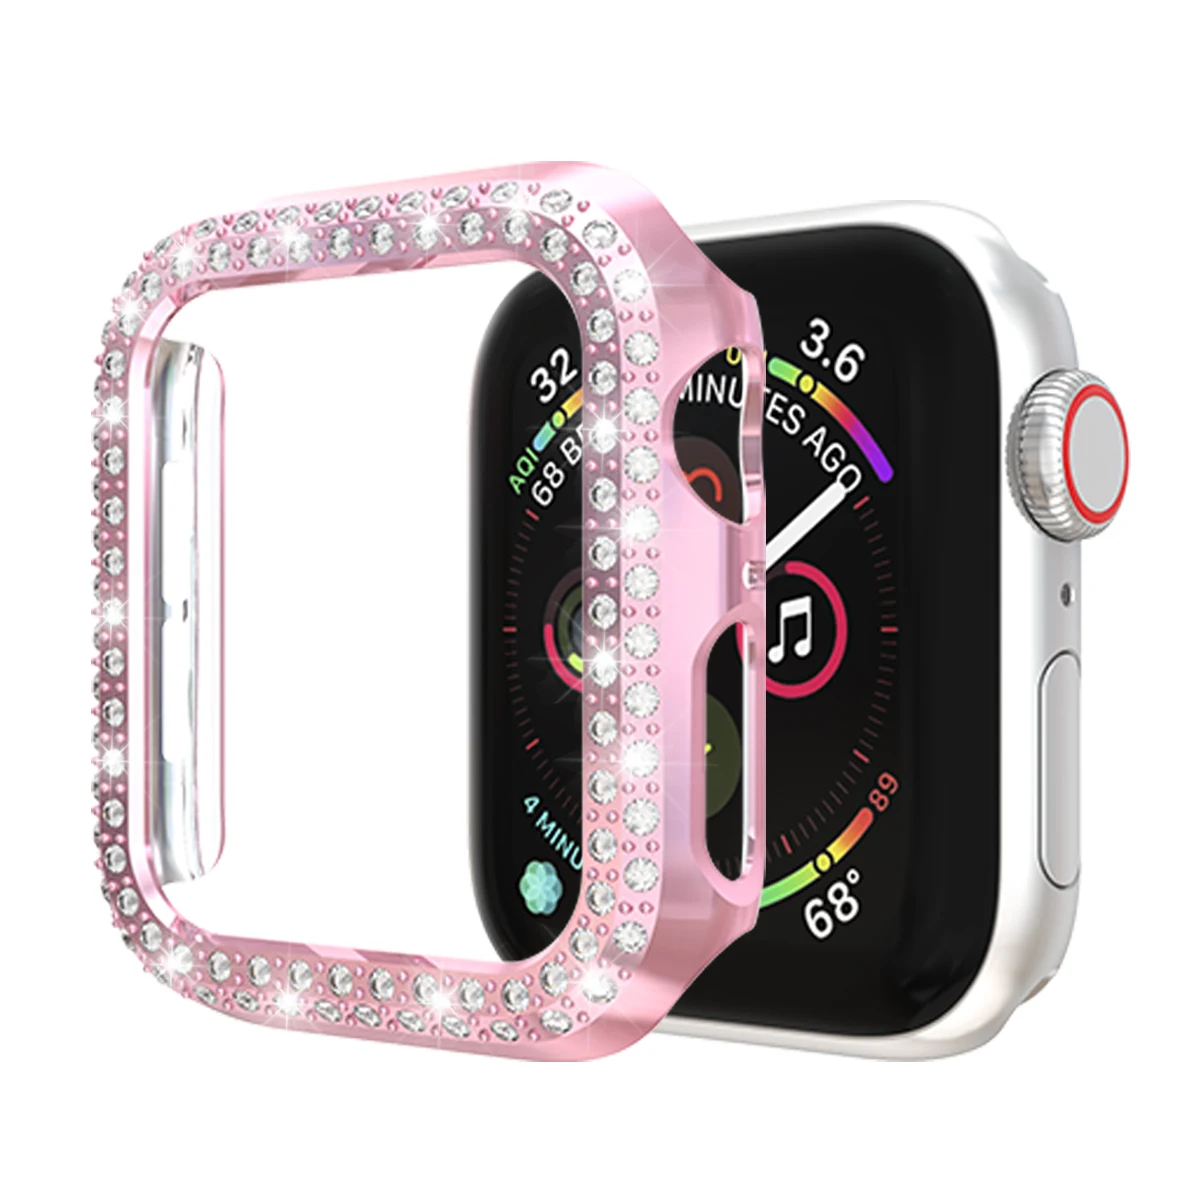 Diamond Protector Case For Apple Watch 38mm 42mm Series 1 2 Double Row Diamonds PC Watch Case For apple watch 5 40mm 44mm Cover